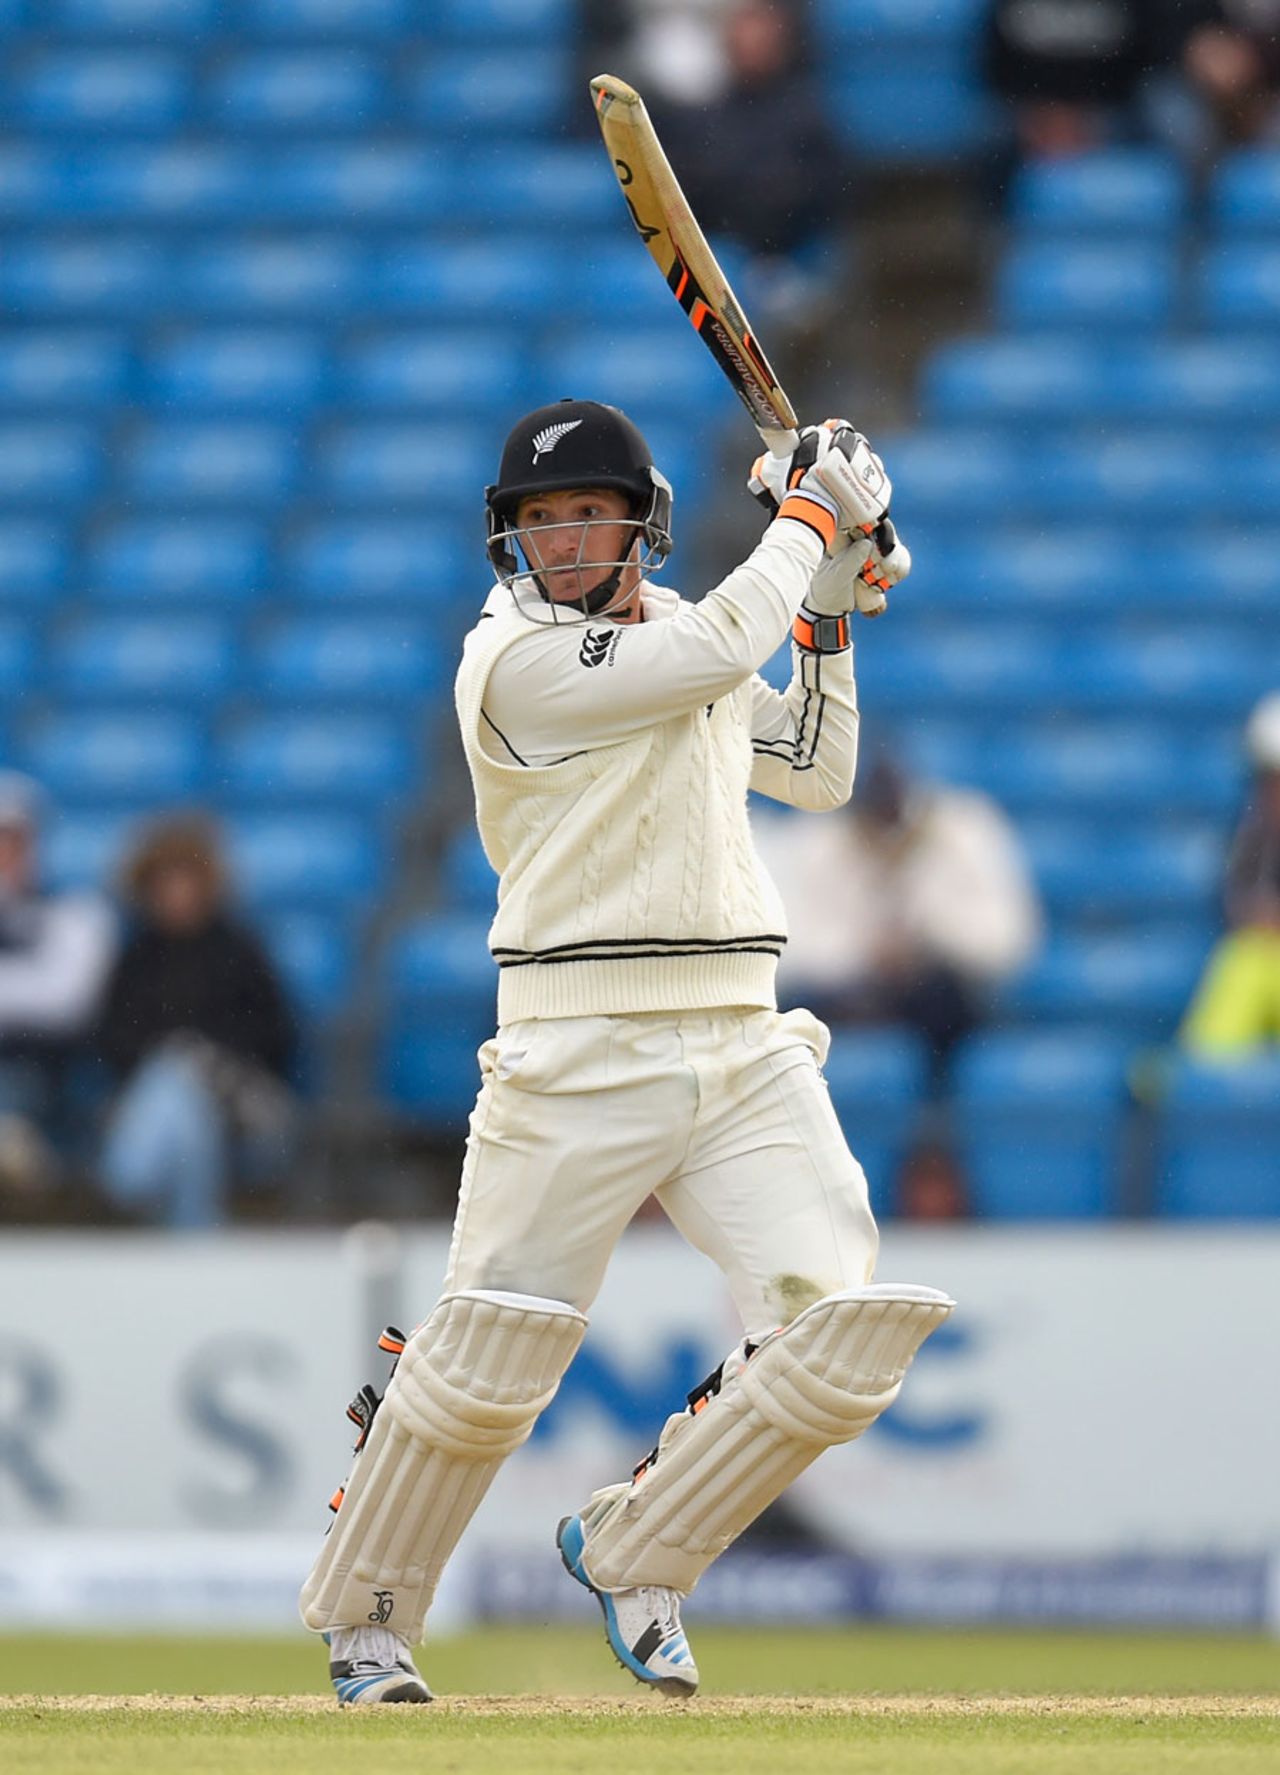 BJ Watling produced another very compact innings, England v New Zealand, 2nd Investec Test, Headingley, 3rd day, May 31, 2015